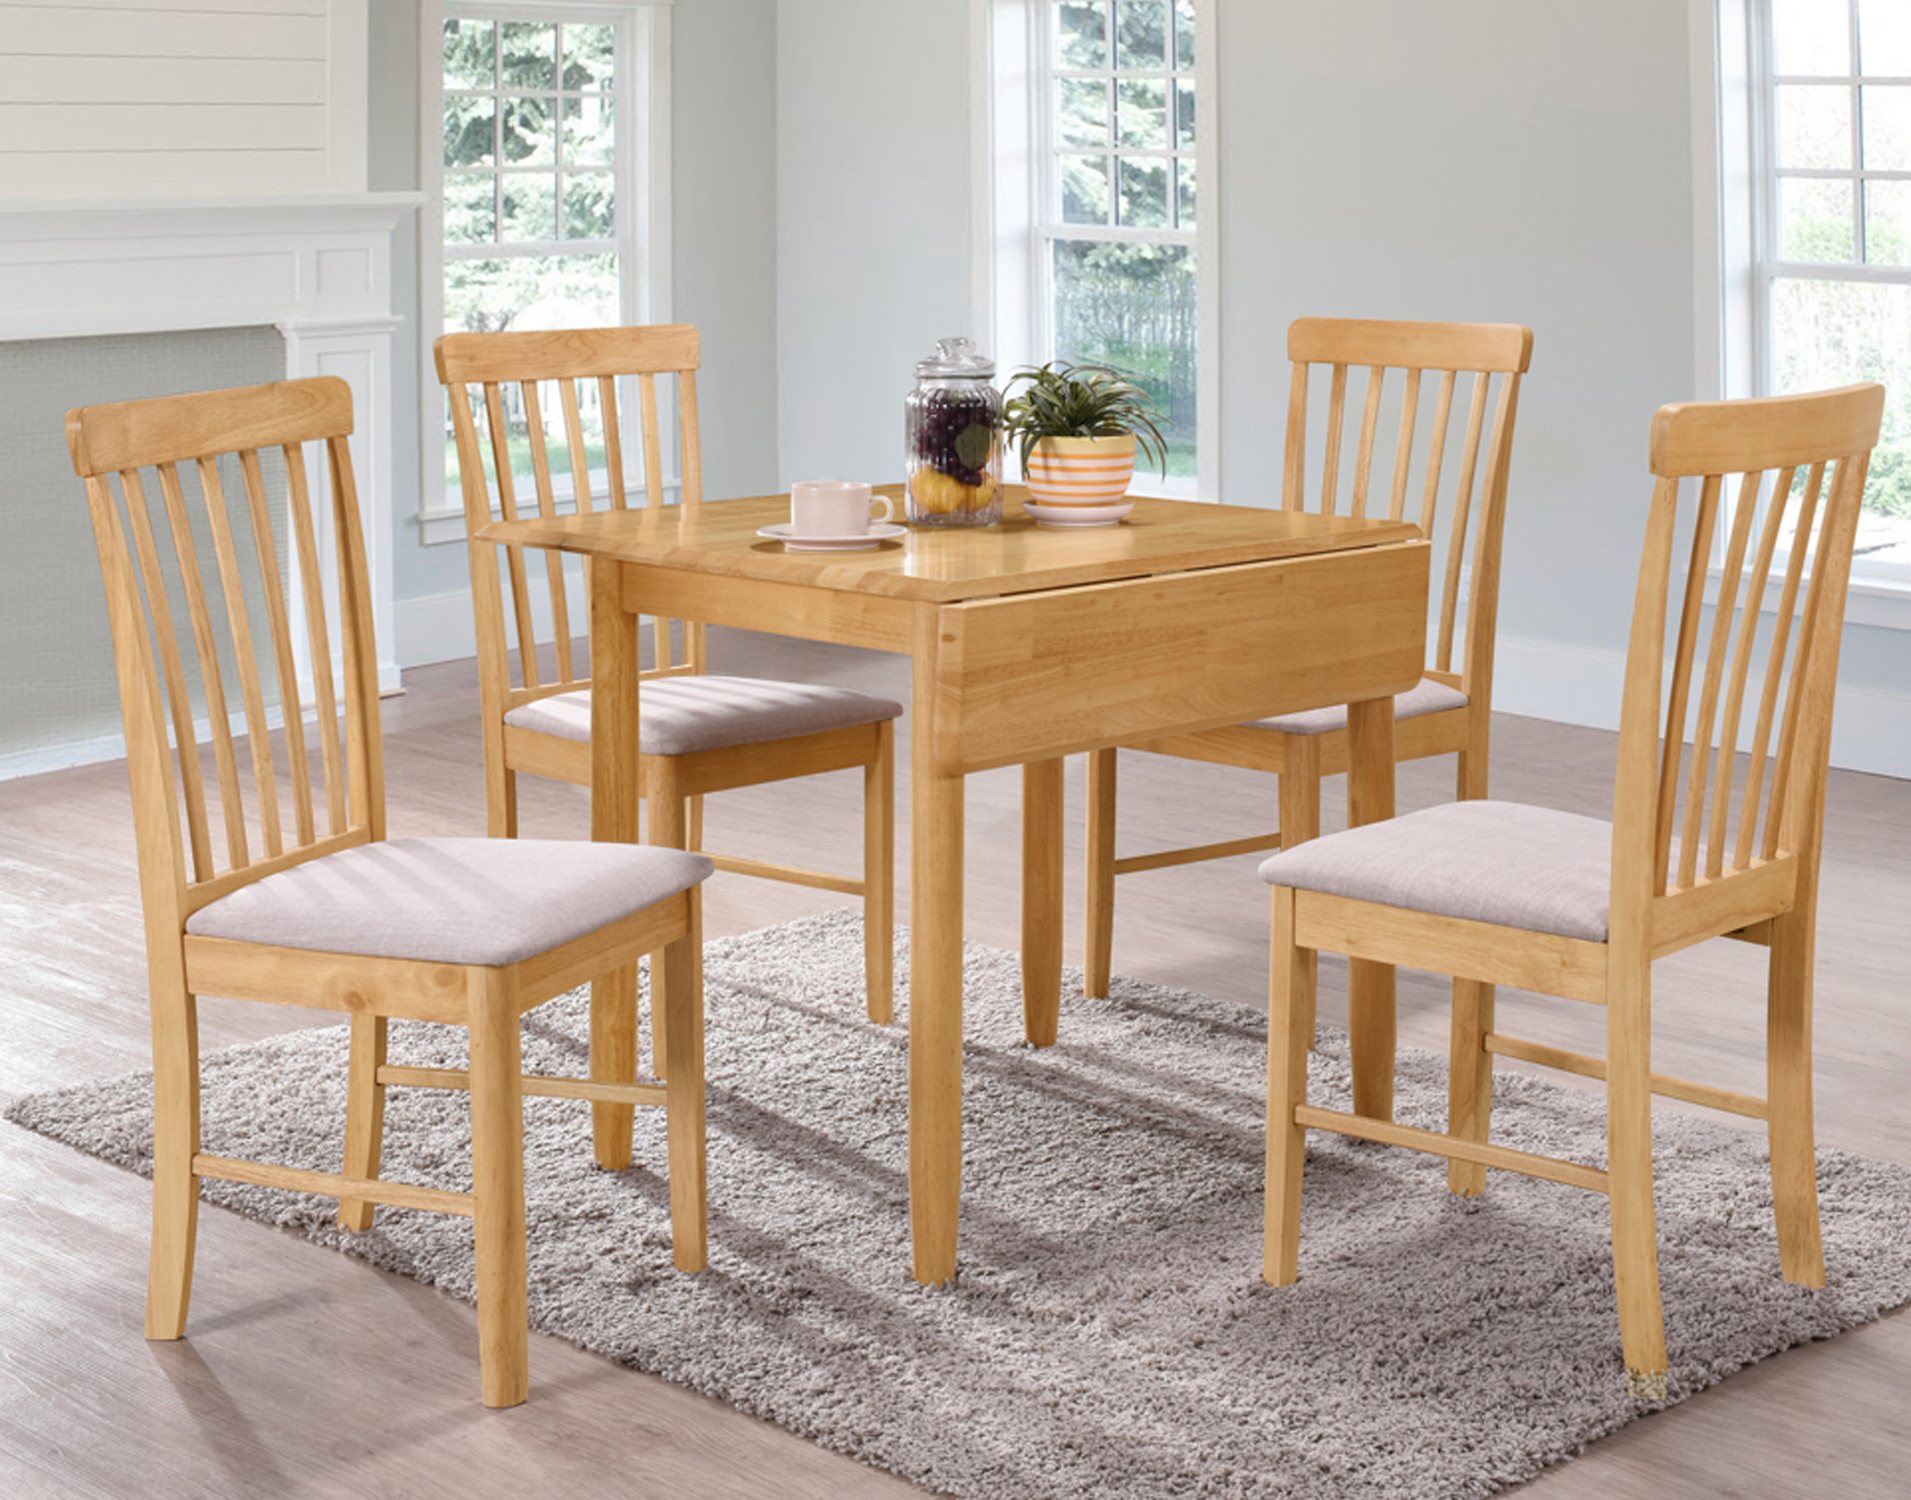 drop leaf dining table for small spaces